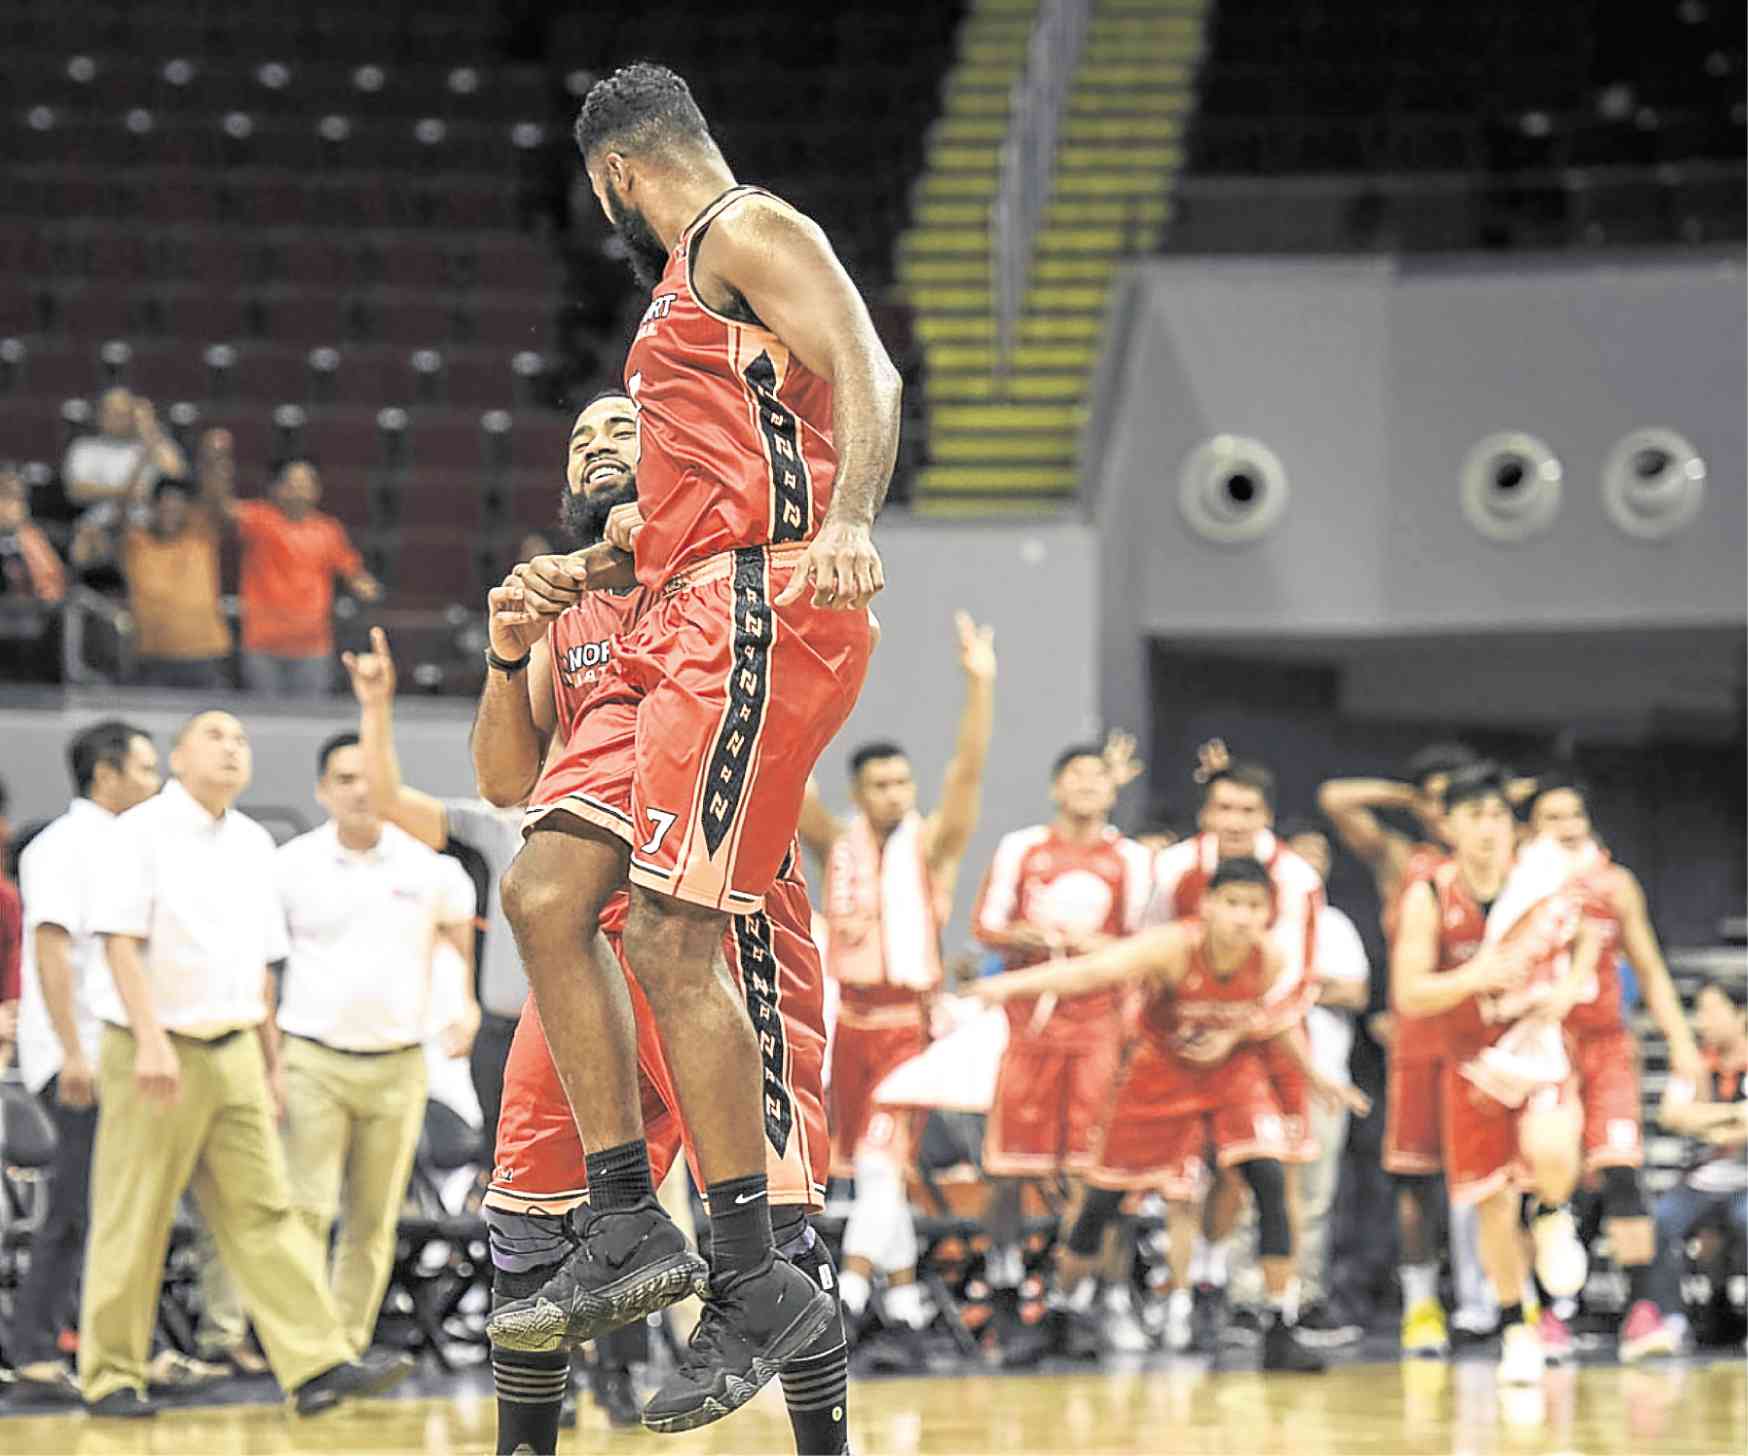 NorthPort has been basking in that winning feeling lately, but the Batang Pier still need a key victory over Barangay Ginebra to advance. —Sherwin Vardeleon